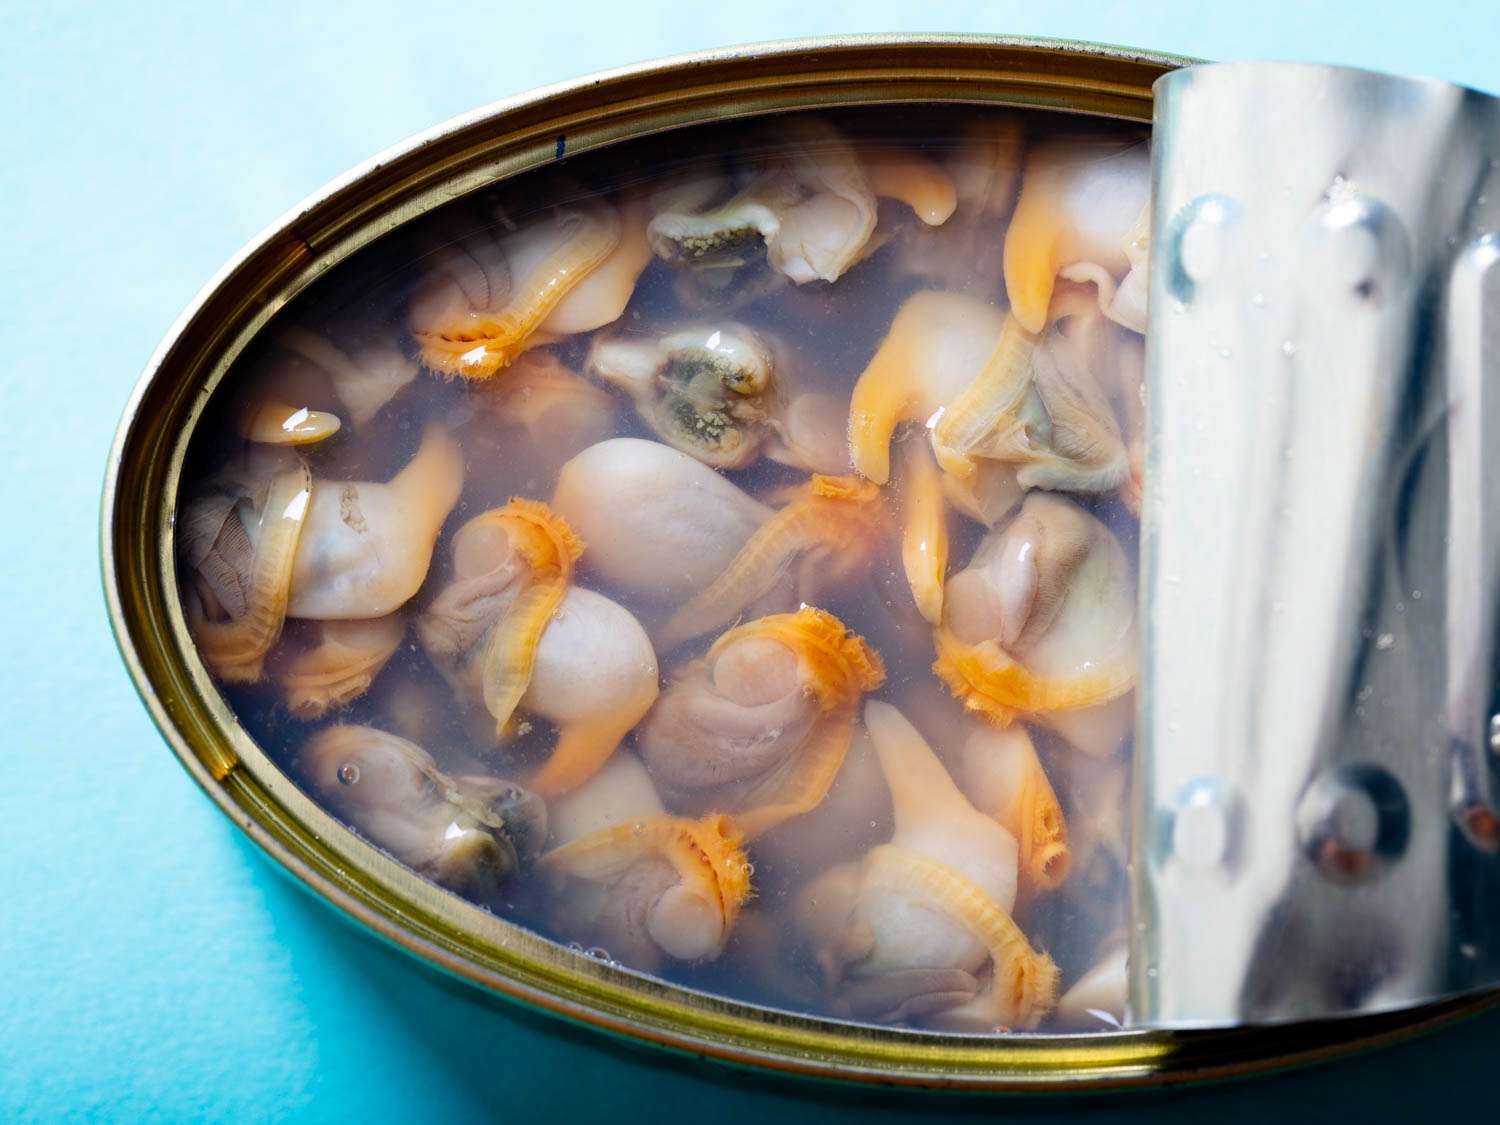 Close up of cockles in their tin.